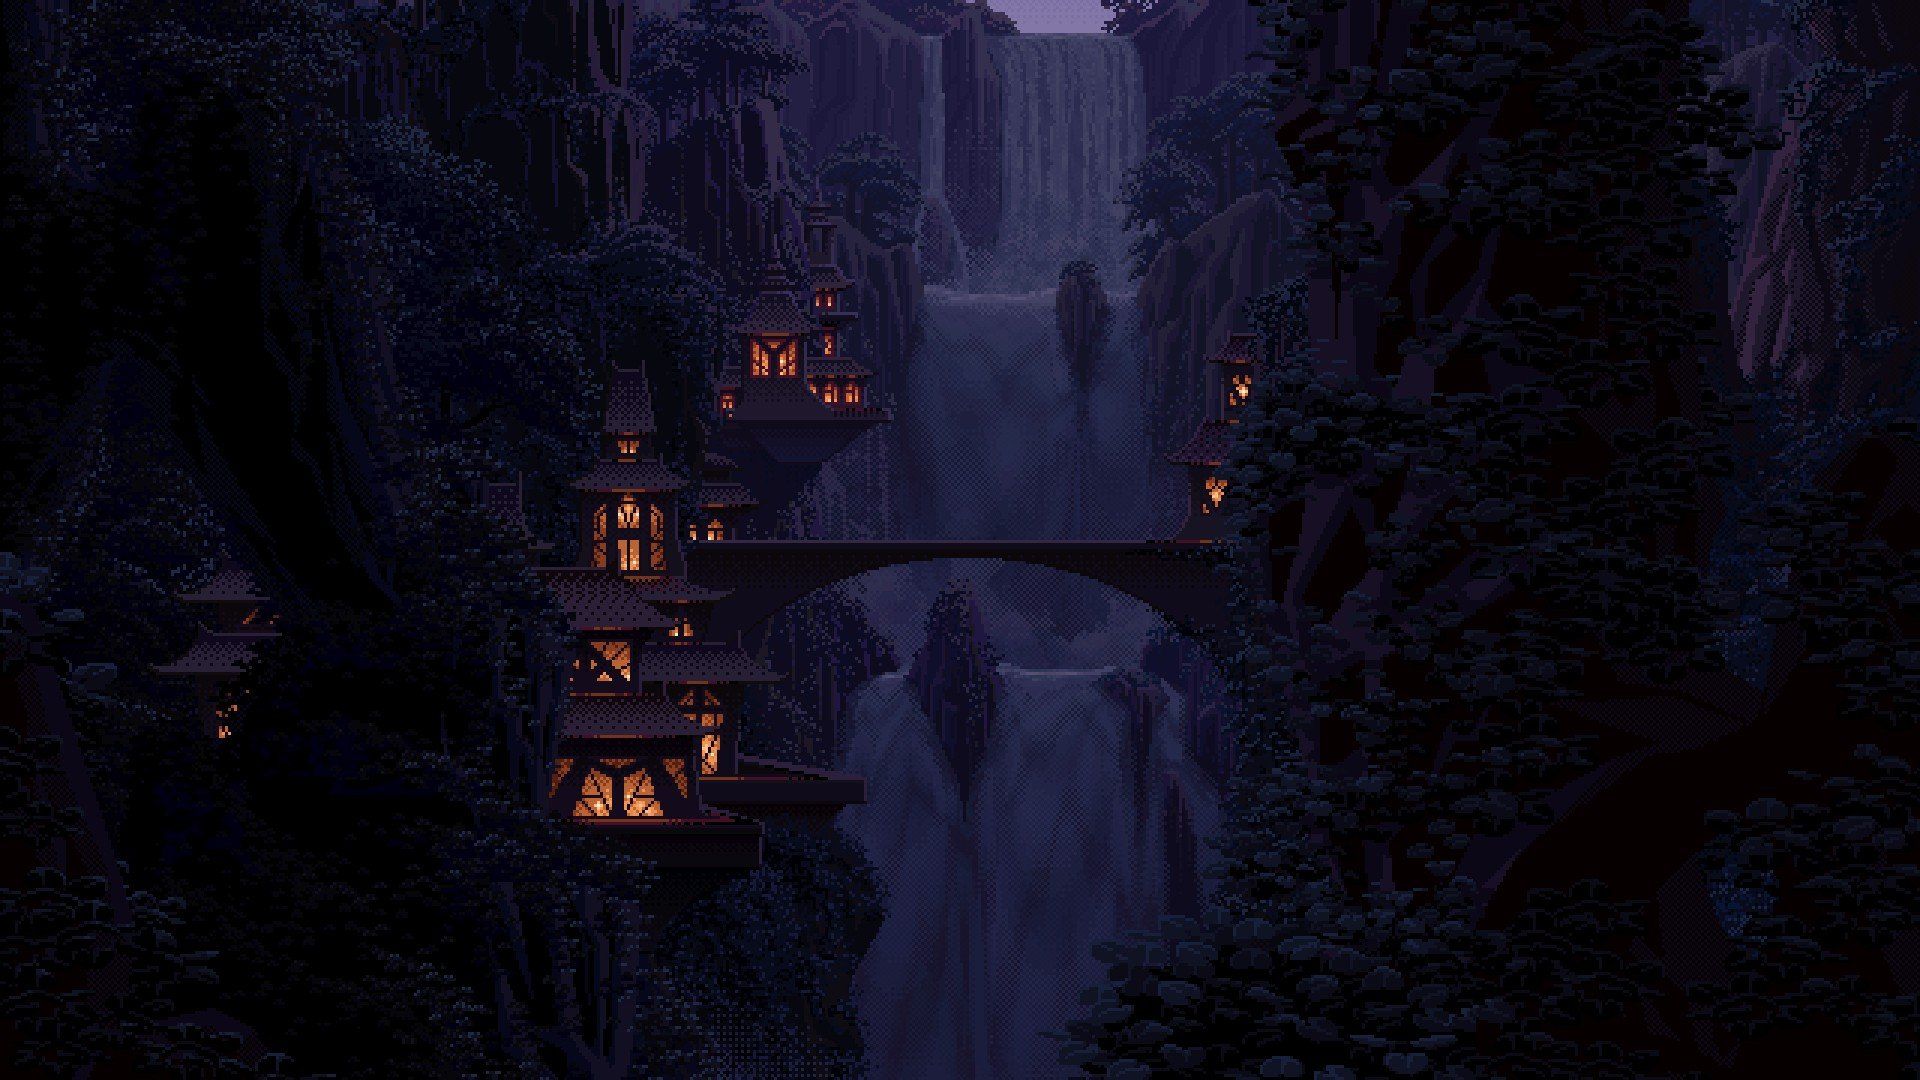 A waterfall in the middle of some trees - Pixel art